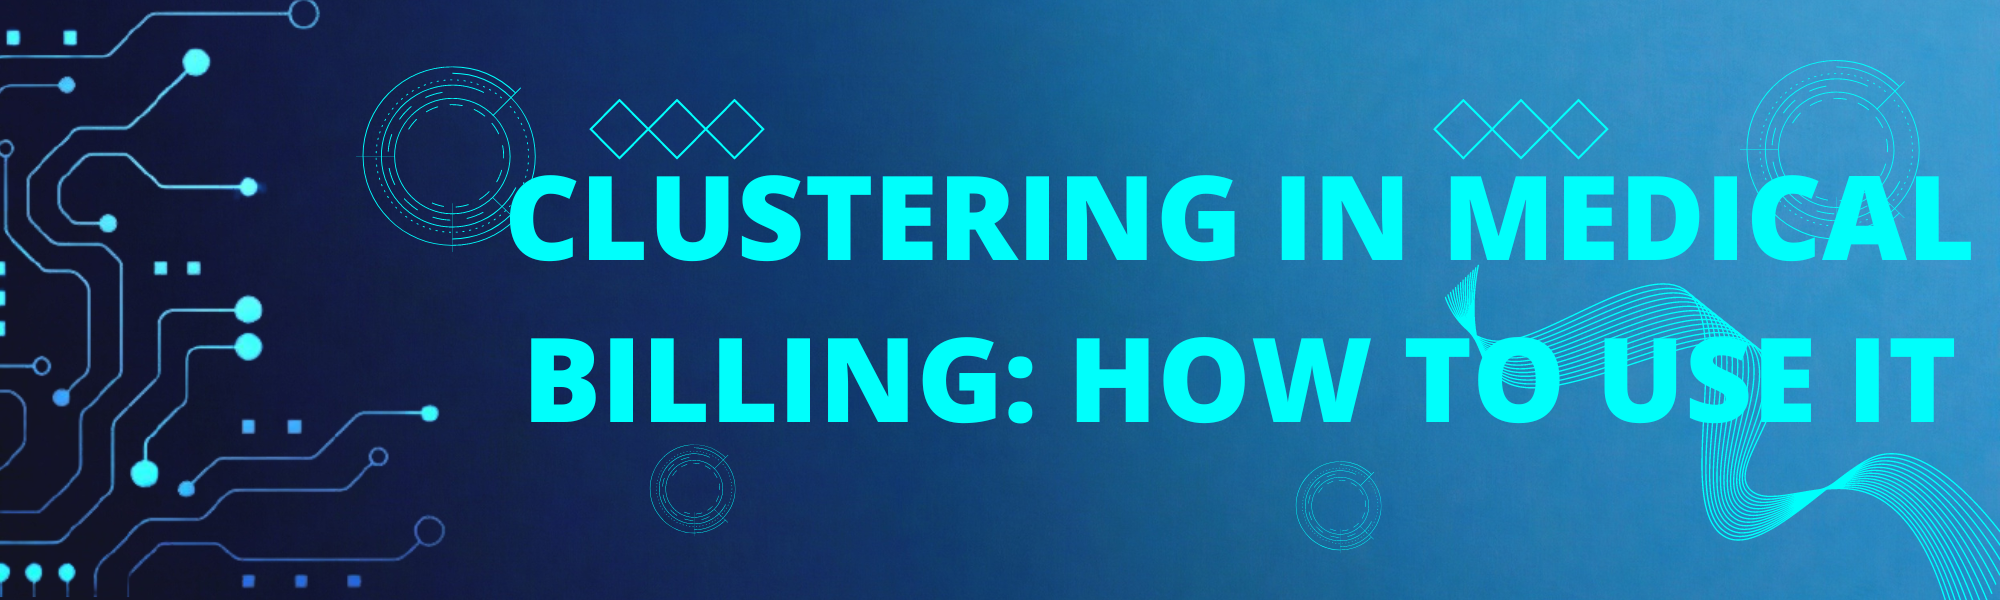 Clustering in Medical Billing: How to Use It